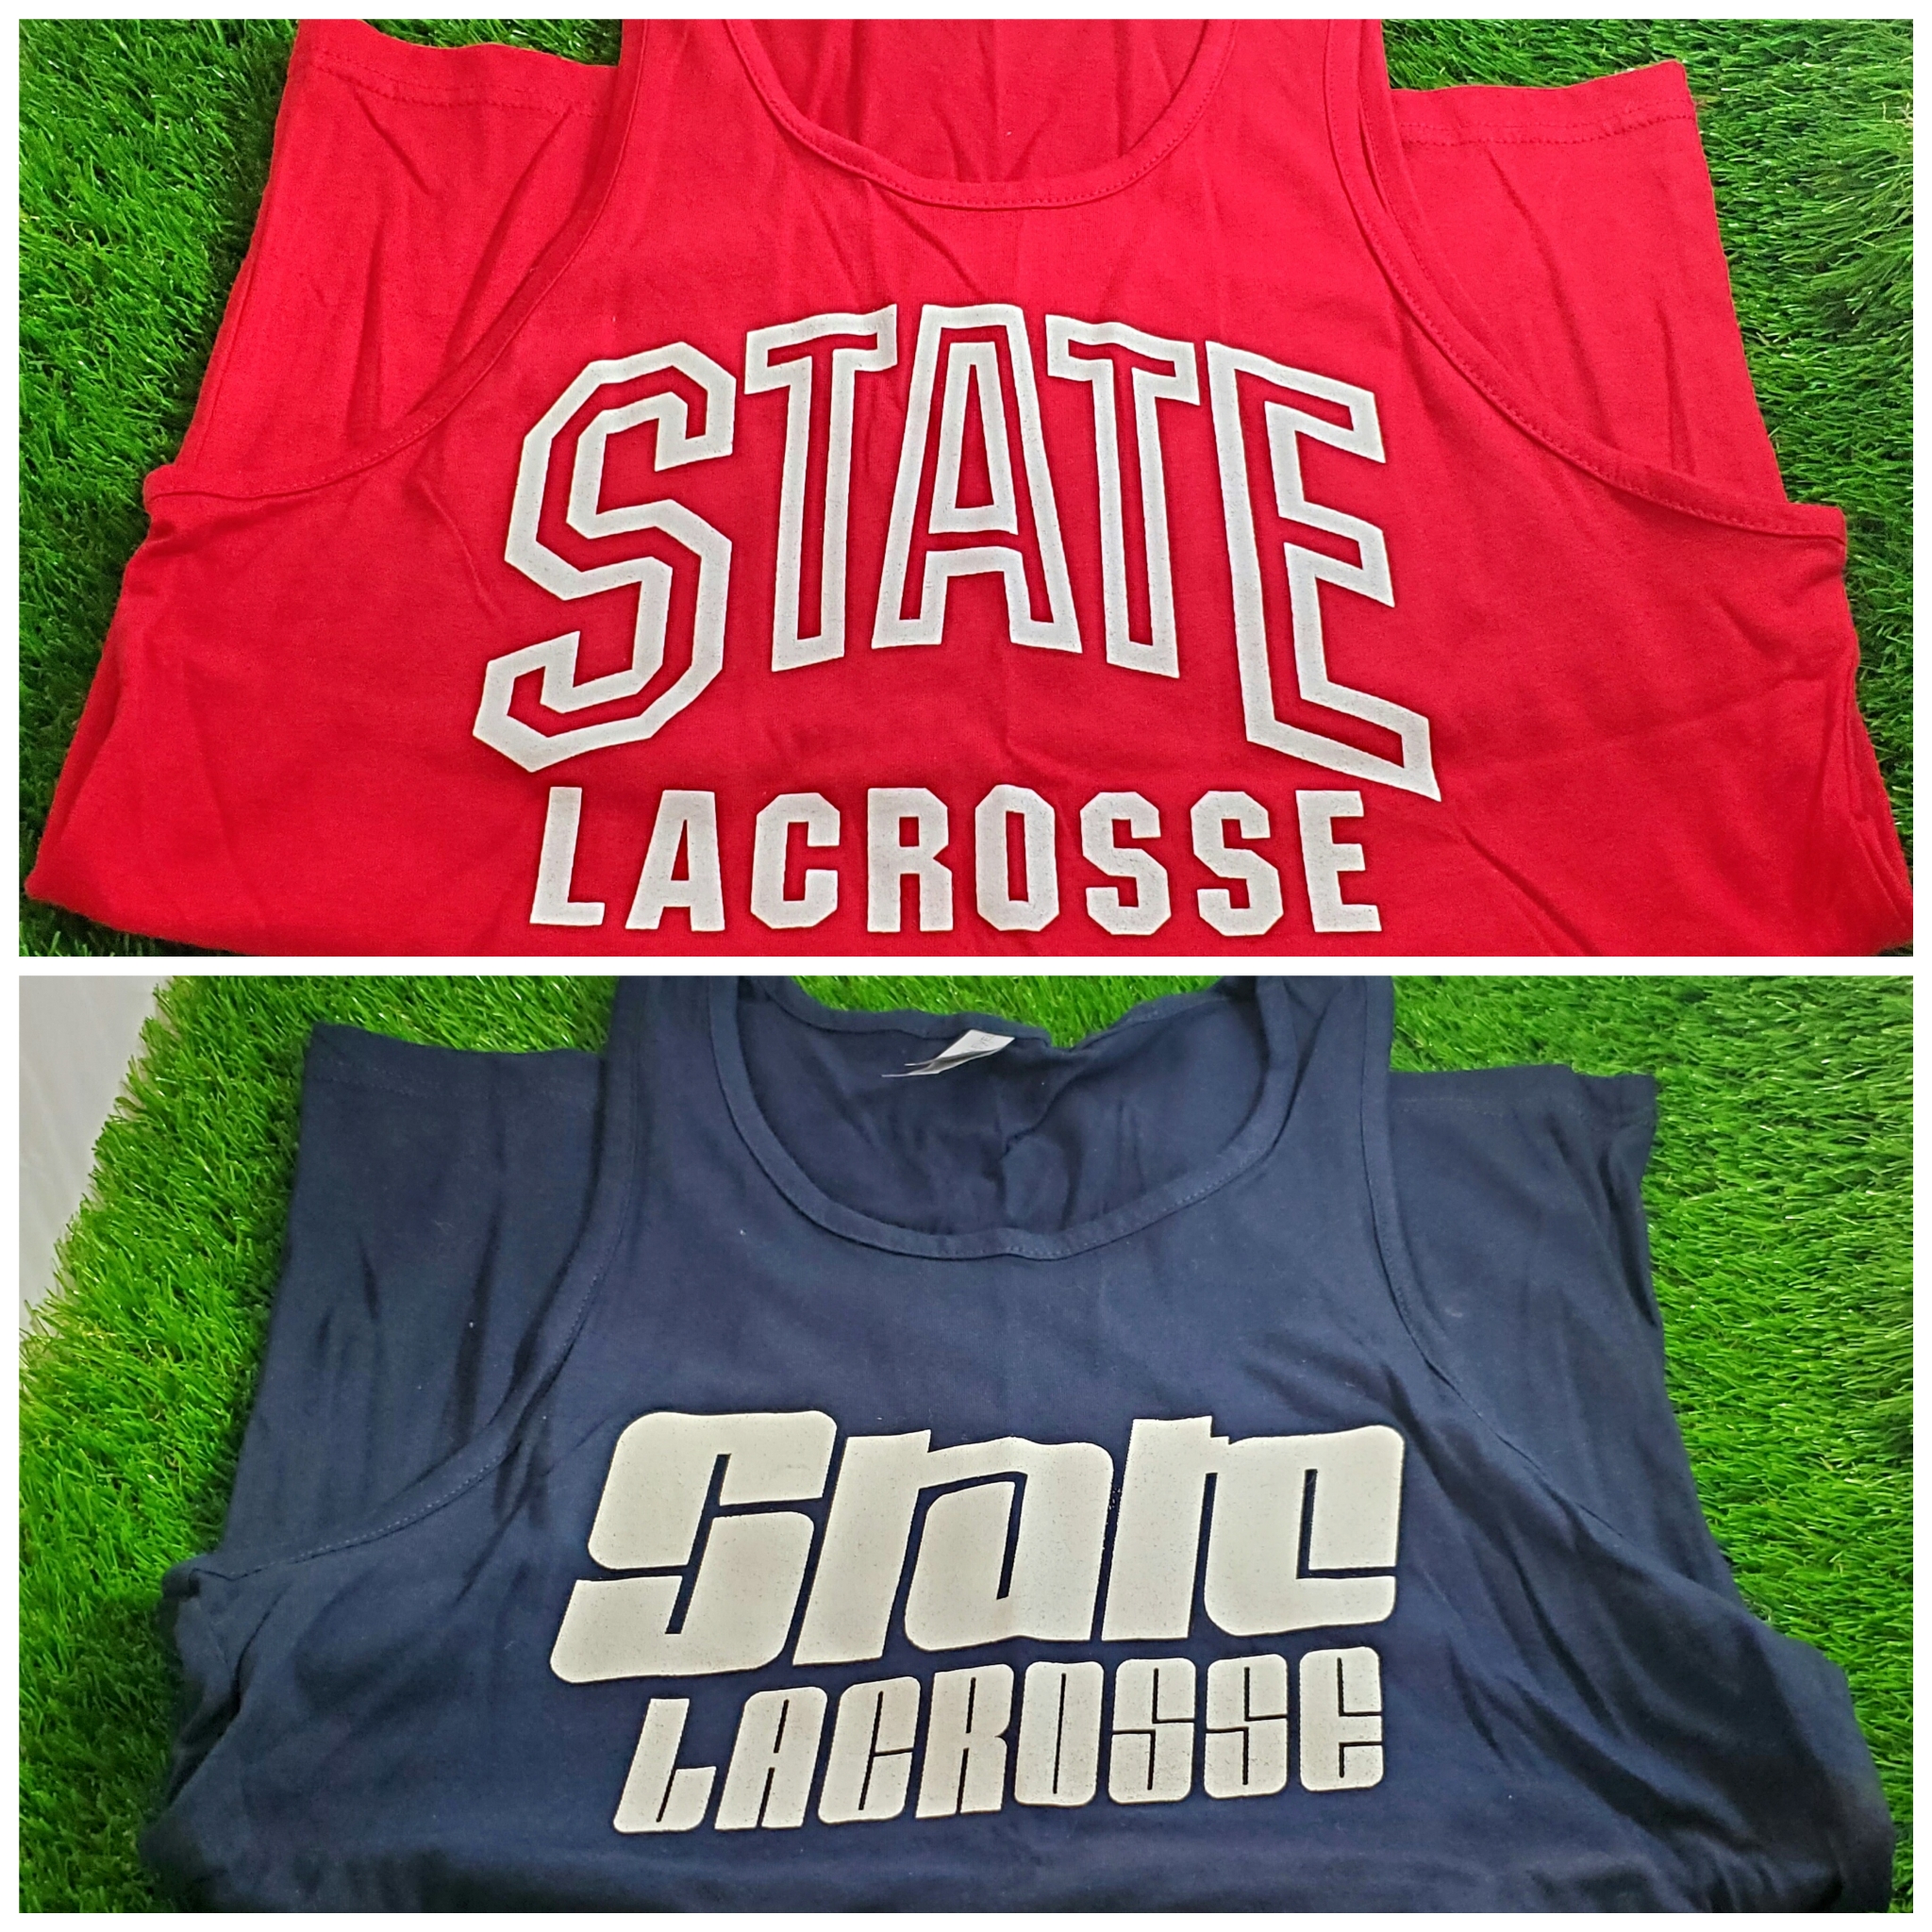 New State Lacrosse Tank Top T Shirt